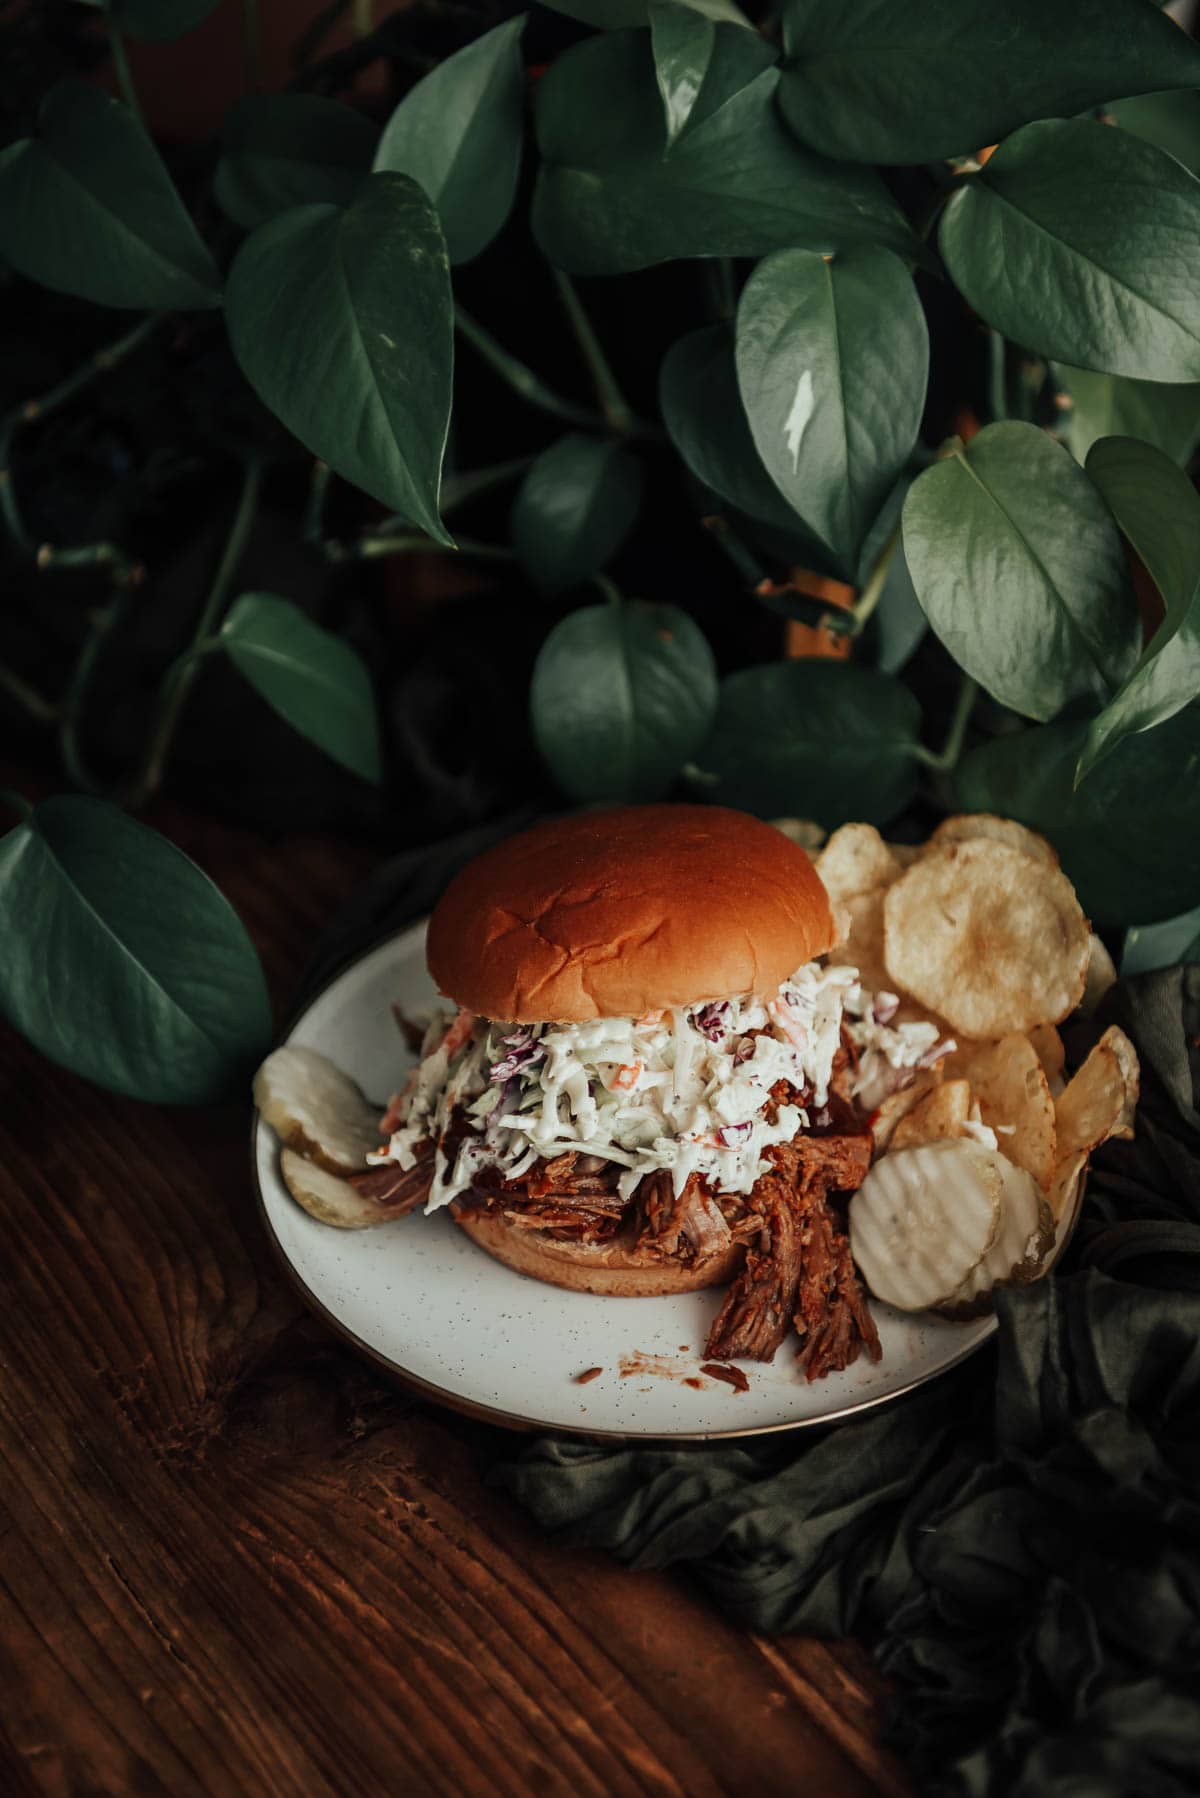 A pulled pork sandwich with coleslaw and potato chips on a plate.